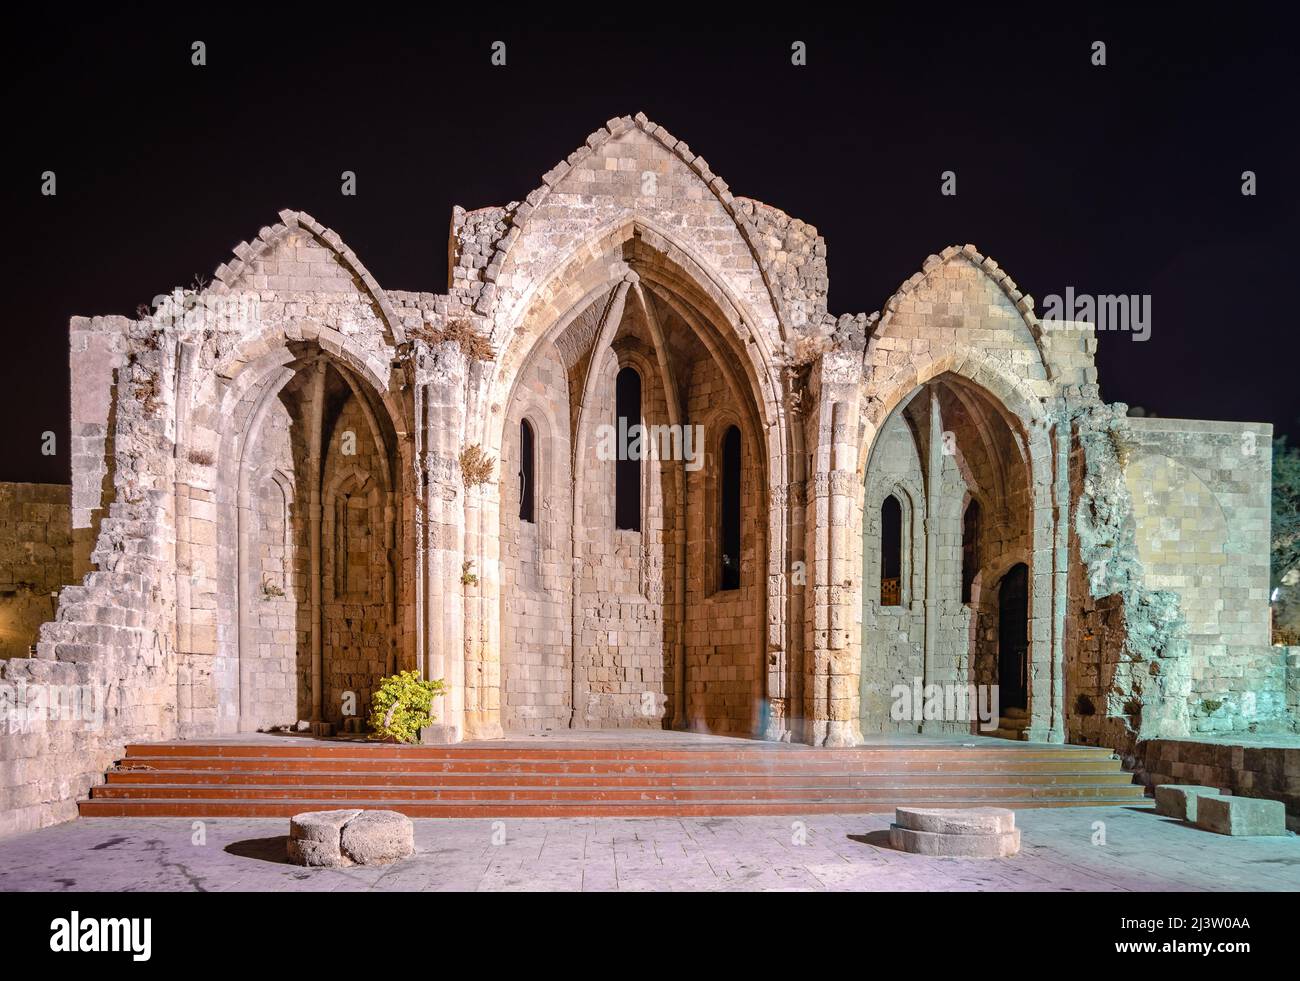 The ruins of the Church of Panagia tou Bourgou (Our Lady of the Bourg), built in the 14th century in the island of Rhodes, Dodecanese, Greece. Stock Photo